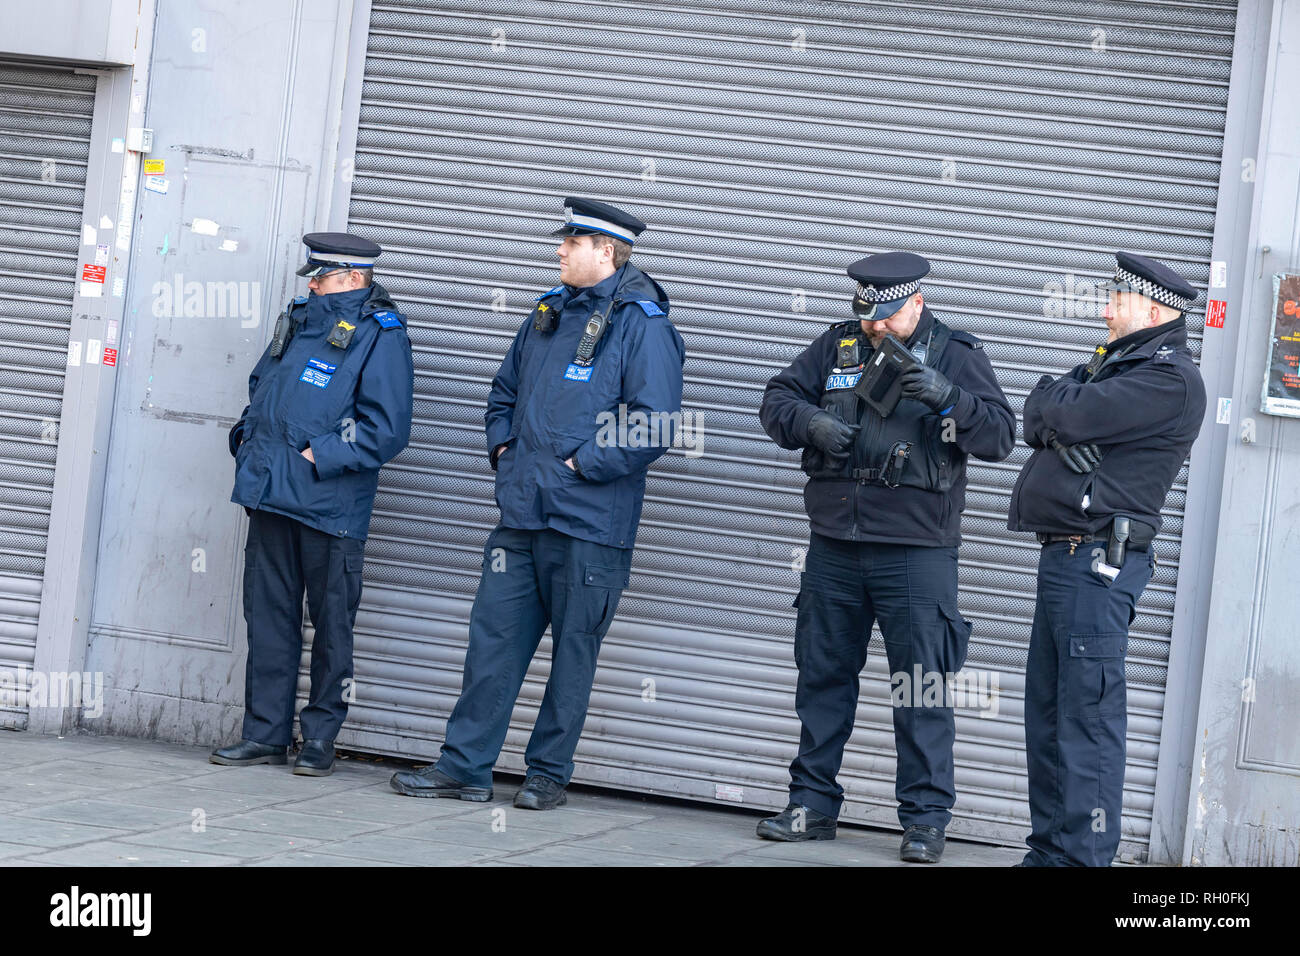 Romford, Essex, UK. 31st January 2019 Metropolitan Police trial live Facial recognition technology outside Romford Station. The police cameras scan passers by and check them against a 'watch list' in real time allowing them to apprehend any wanted people. A small number of protesters against the scheme protested outside Romford Station. Police officers wait for the face recogntion cameras to be triggered Credit: Ian Davidson/Alamy Live News Stock Photo